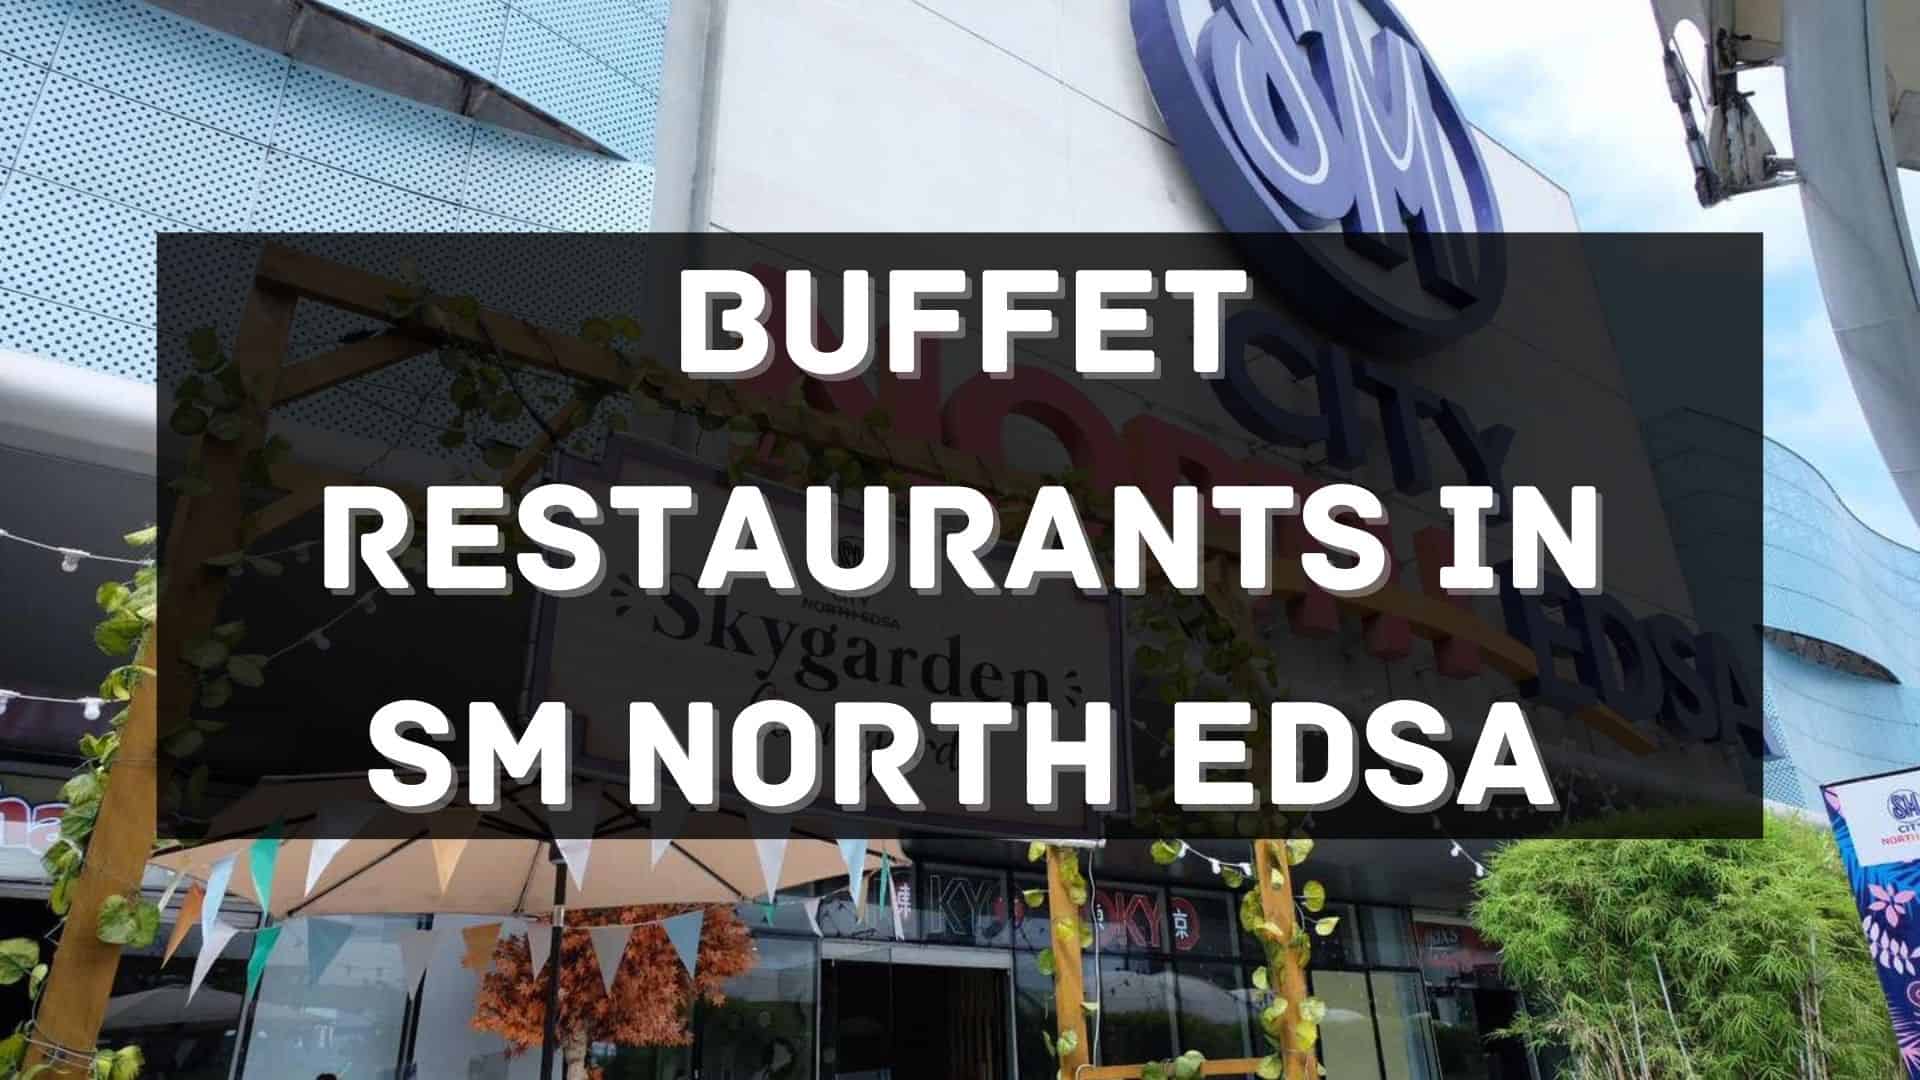 Buffet Restaurants In Sm City North Edsa Must Try Philippines